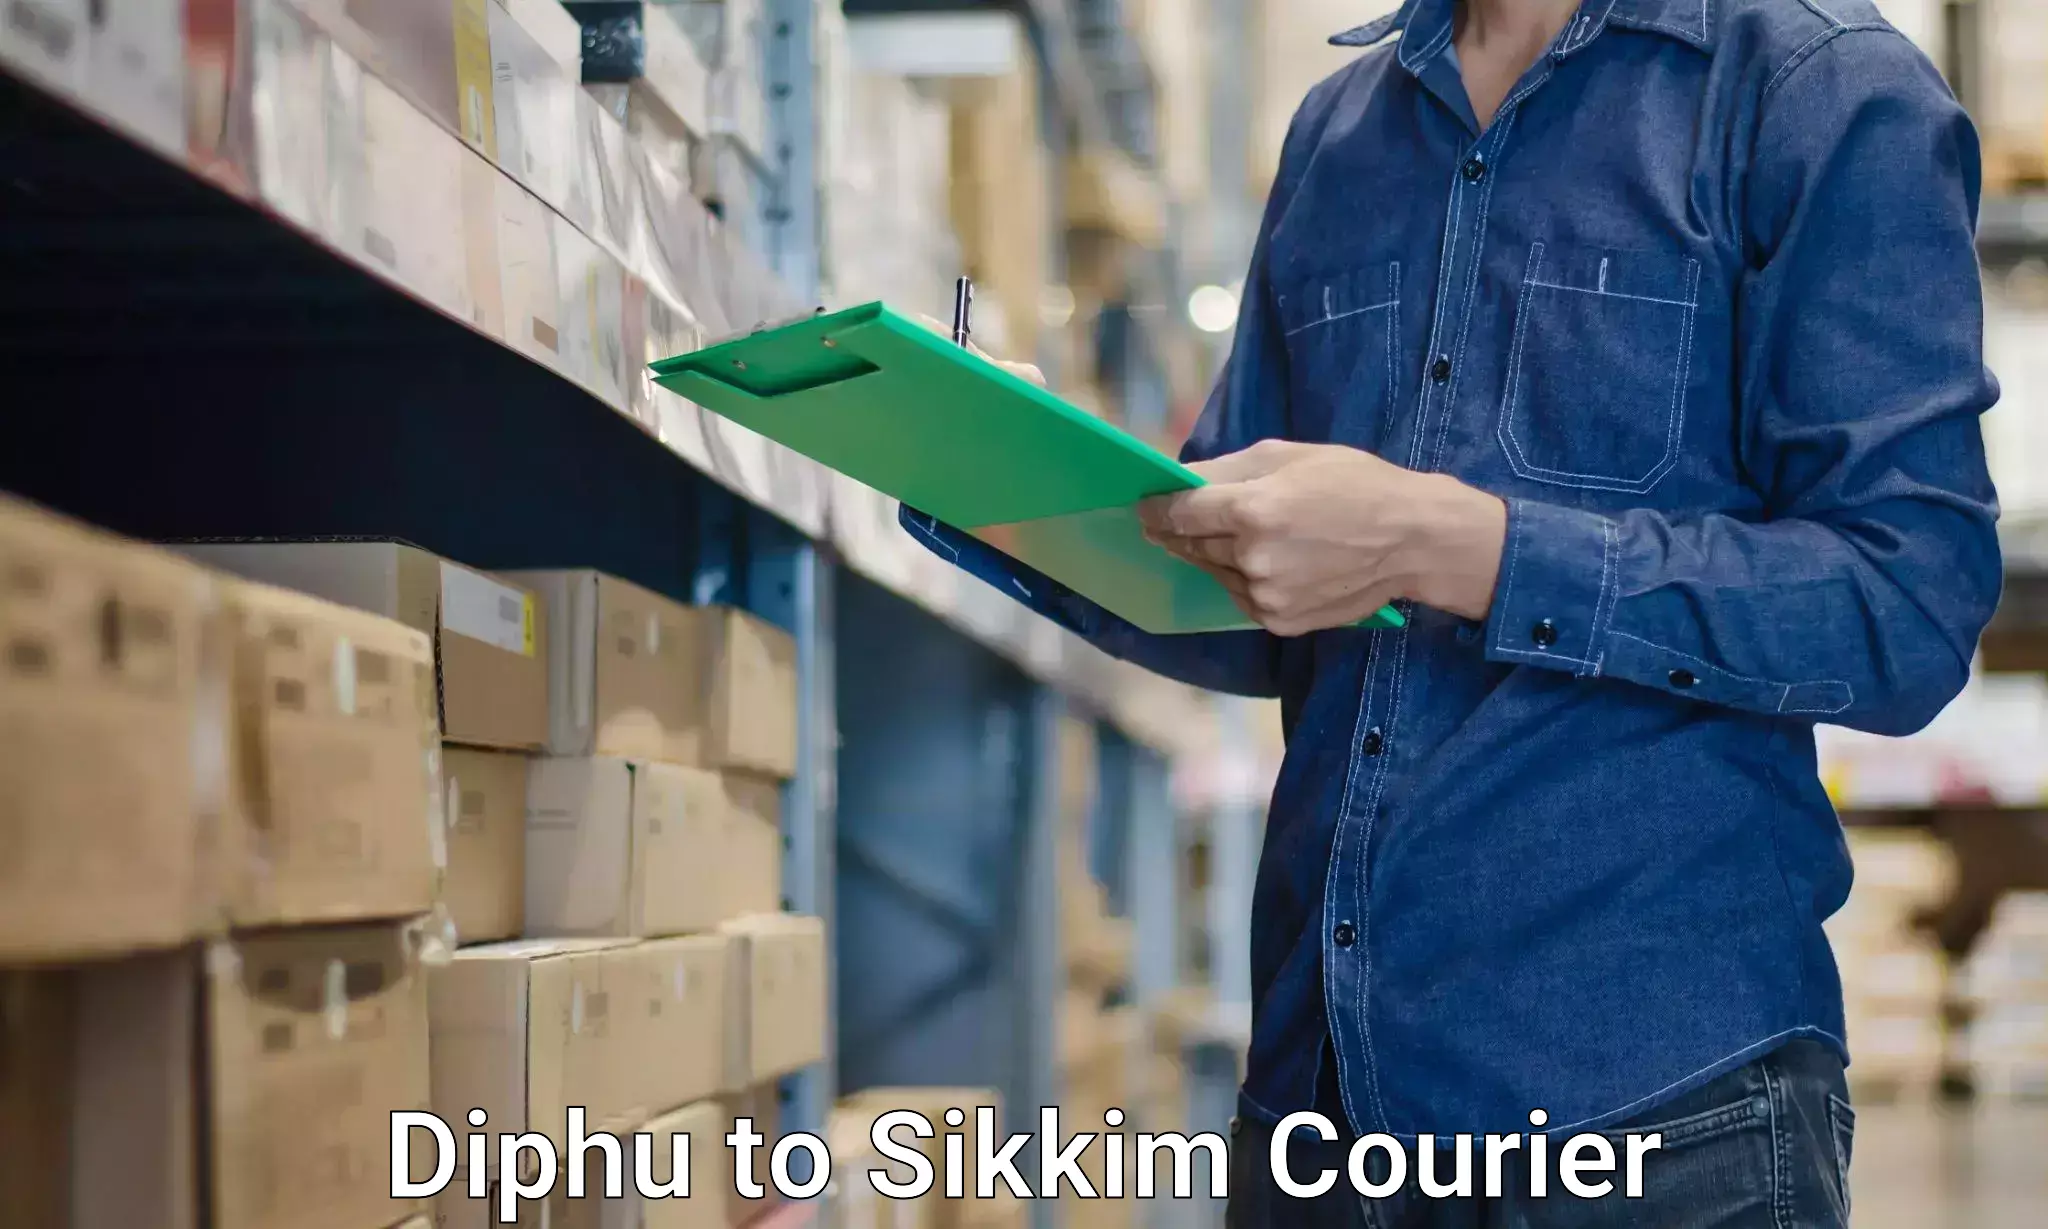 Home shifting experts Diphu to South Sikkim